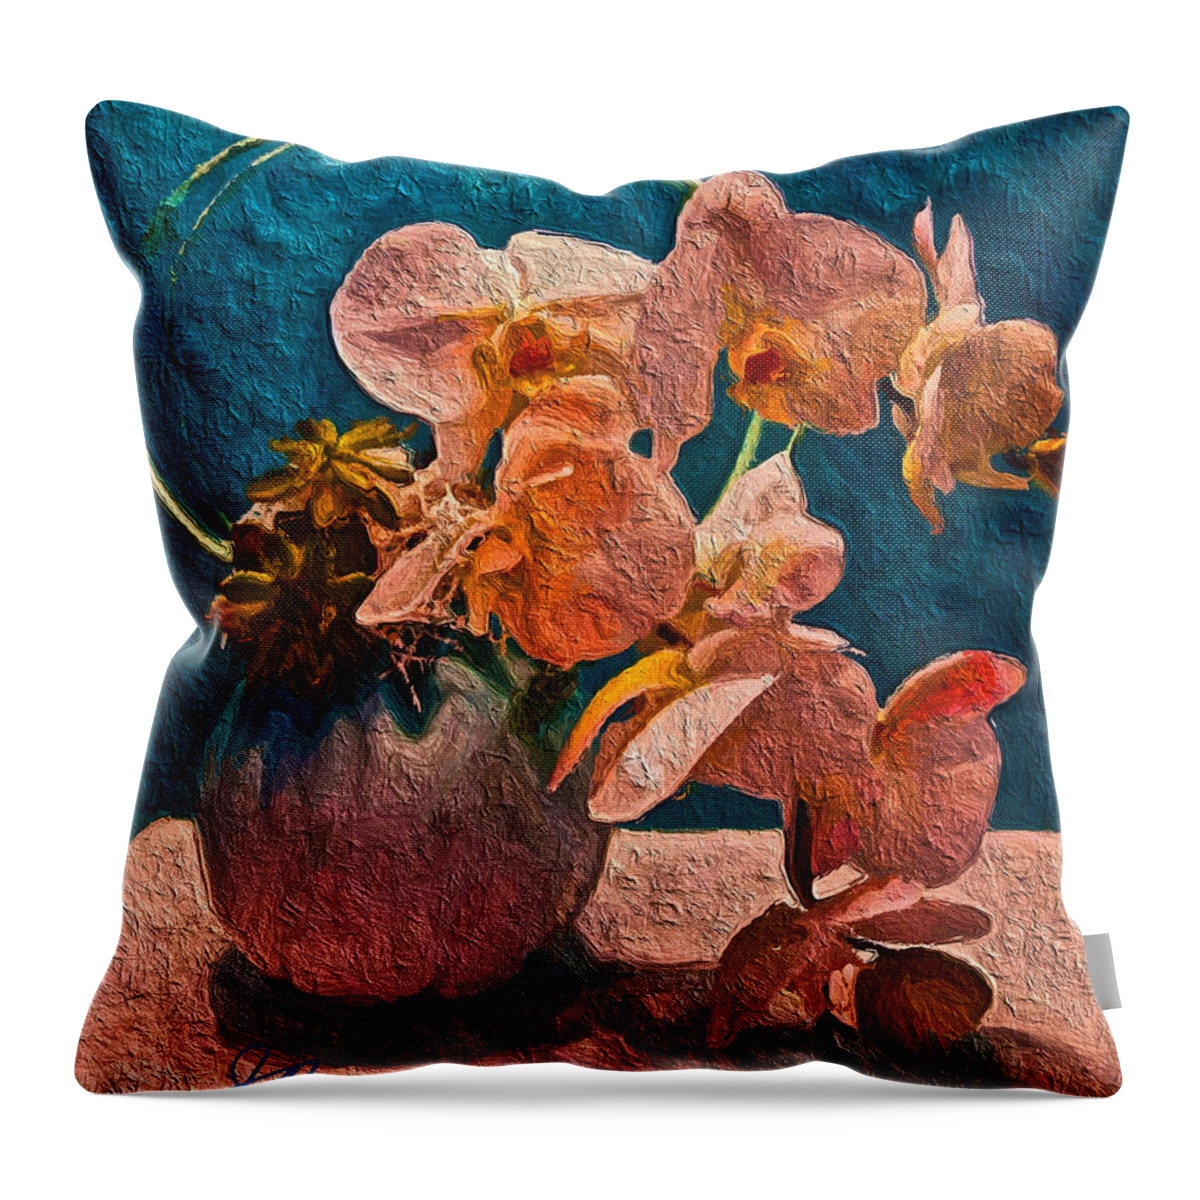 Blue Throw Pillow featuring the painting Designer Floral Arrangement by Joan Reese